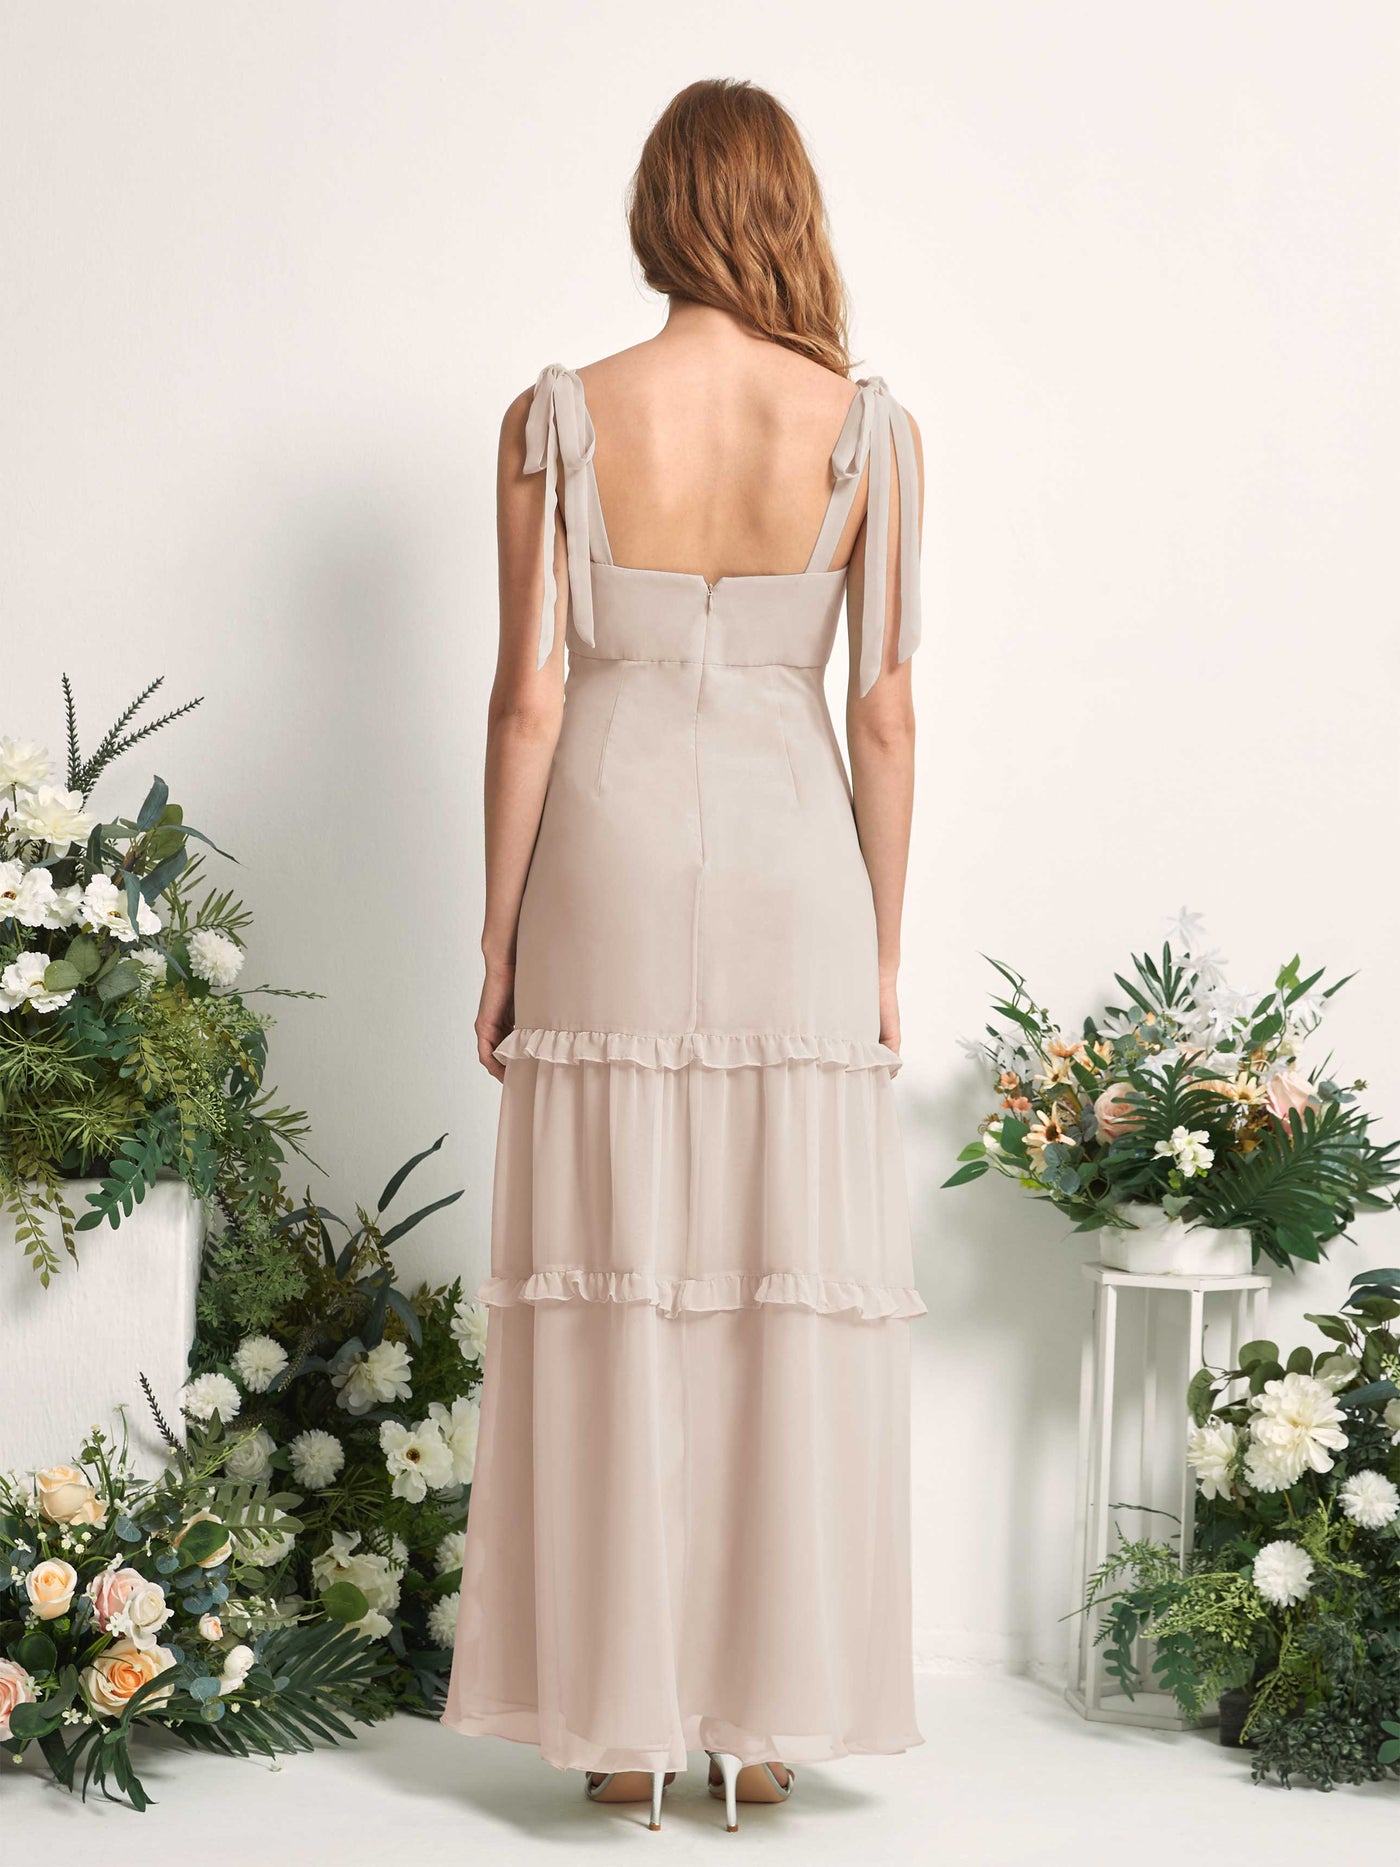 Bridesmaid Dress Chiffon Straps Full Length Sleeveless Wedding Party Dress - Champagne (81227516)#color_champagne